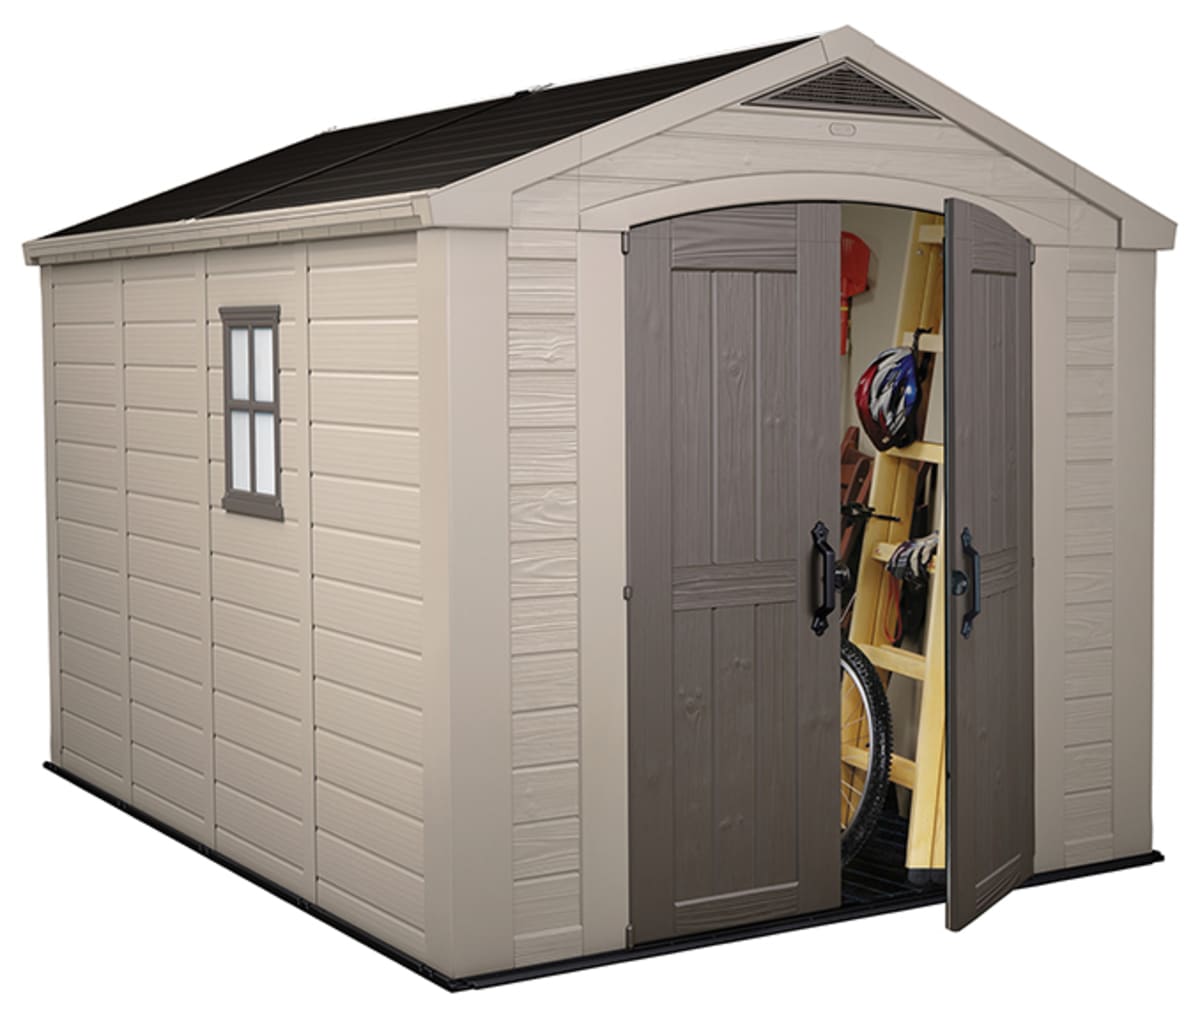 FACTOR HOUSE MOD.8X11 THICKNESS 16MM EXTERNAL DIMENSIONS 326X248X243H FLOOR INCLUDED